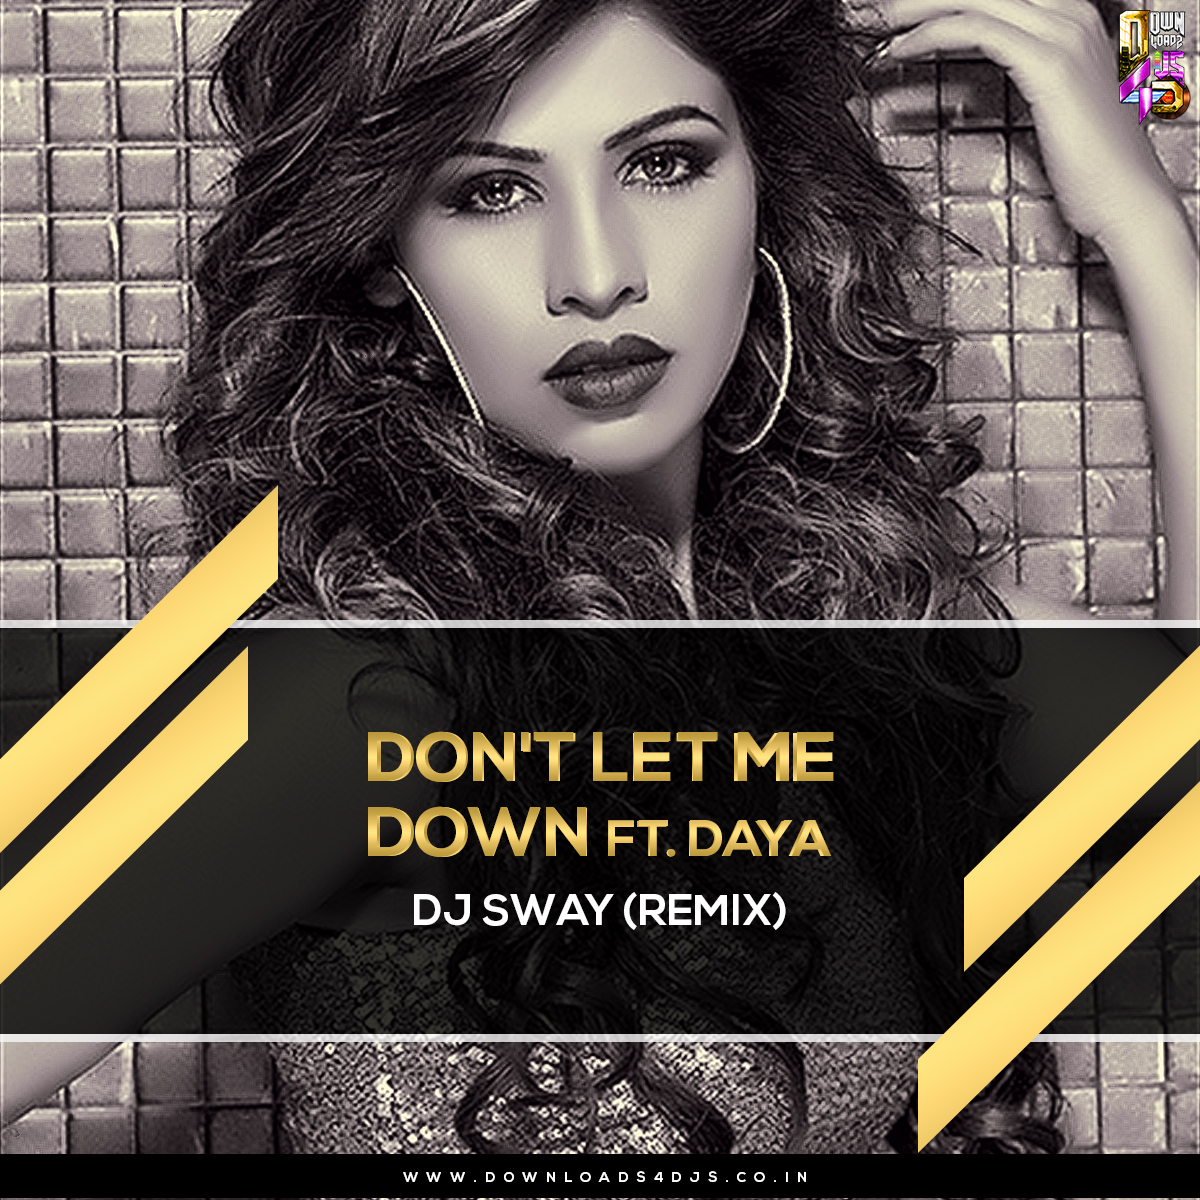 Музыка dont. Don`t Let me down. Daya don't Let me down. Don't Let me down ремикс. Don't Let me down down Let me down.